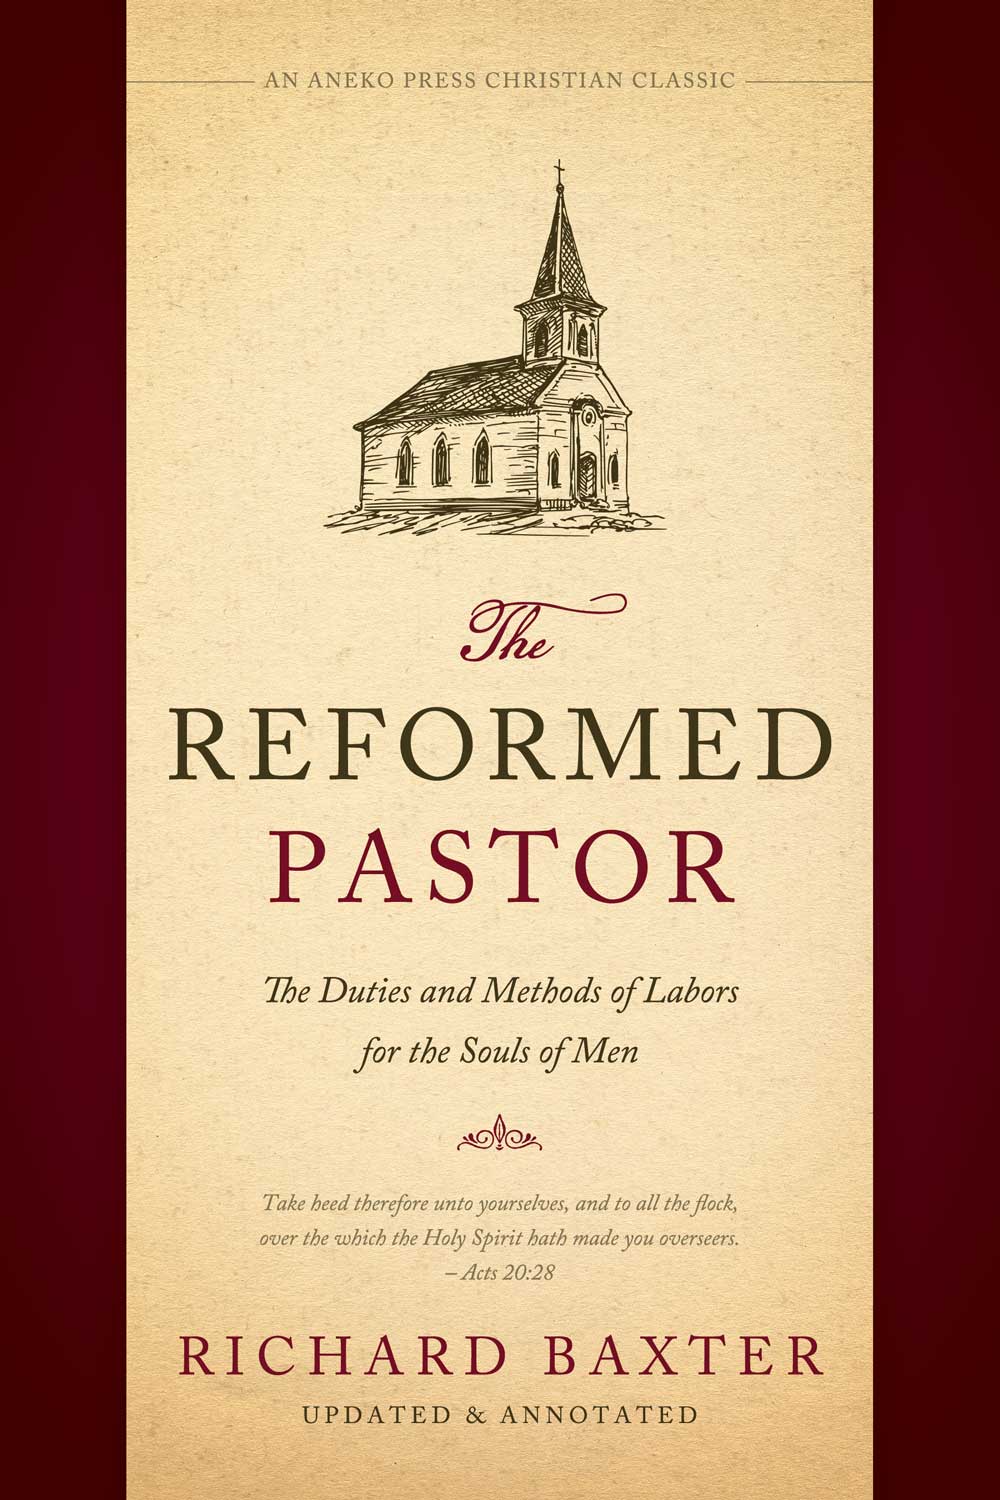 The reformed pastor by richard baxter alcon 2012